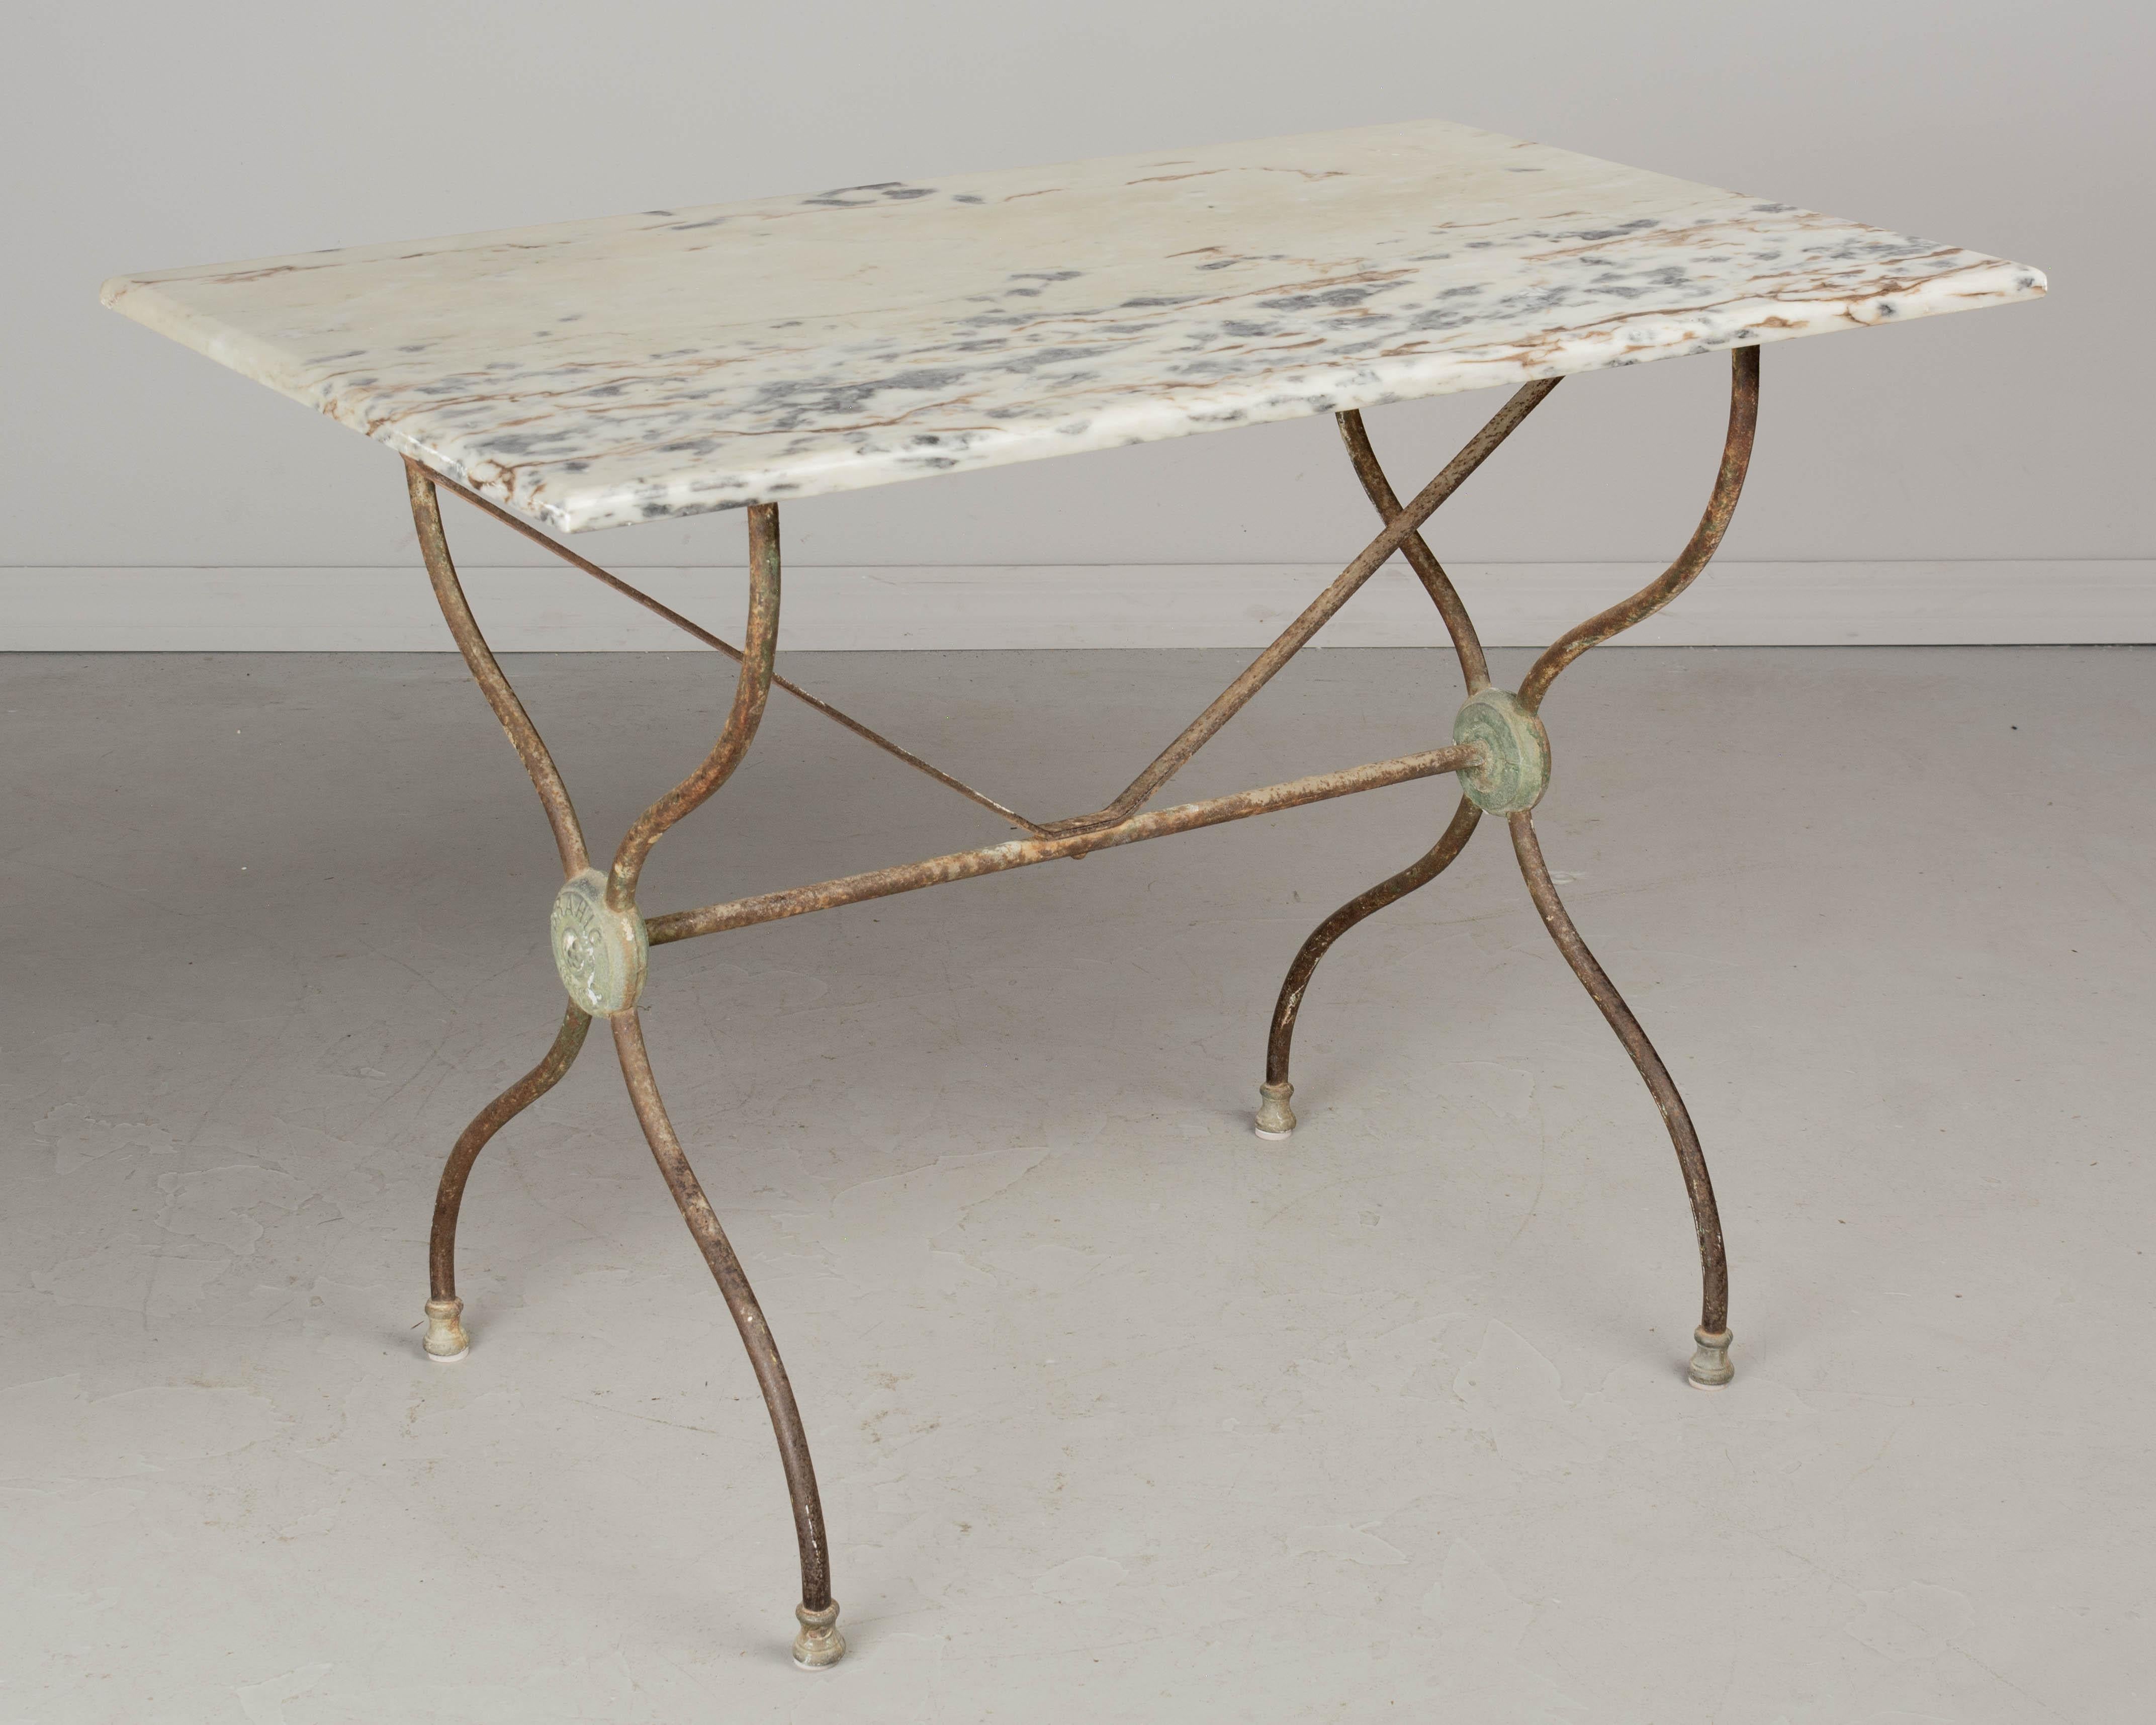 A 19th century French cast iron bistro table with rusty patina and verdigris medallions that read Brahic Nimes. Nice old marble top with interesting gray and brown veining. Circa 1880-1900. 
Dimensions: 39.5